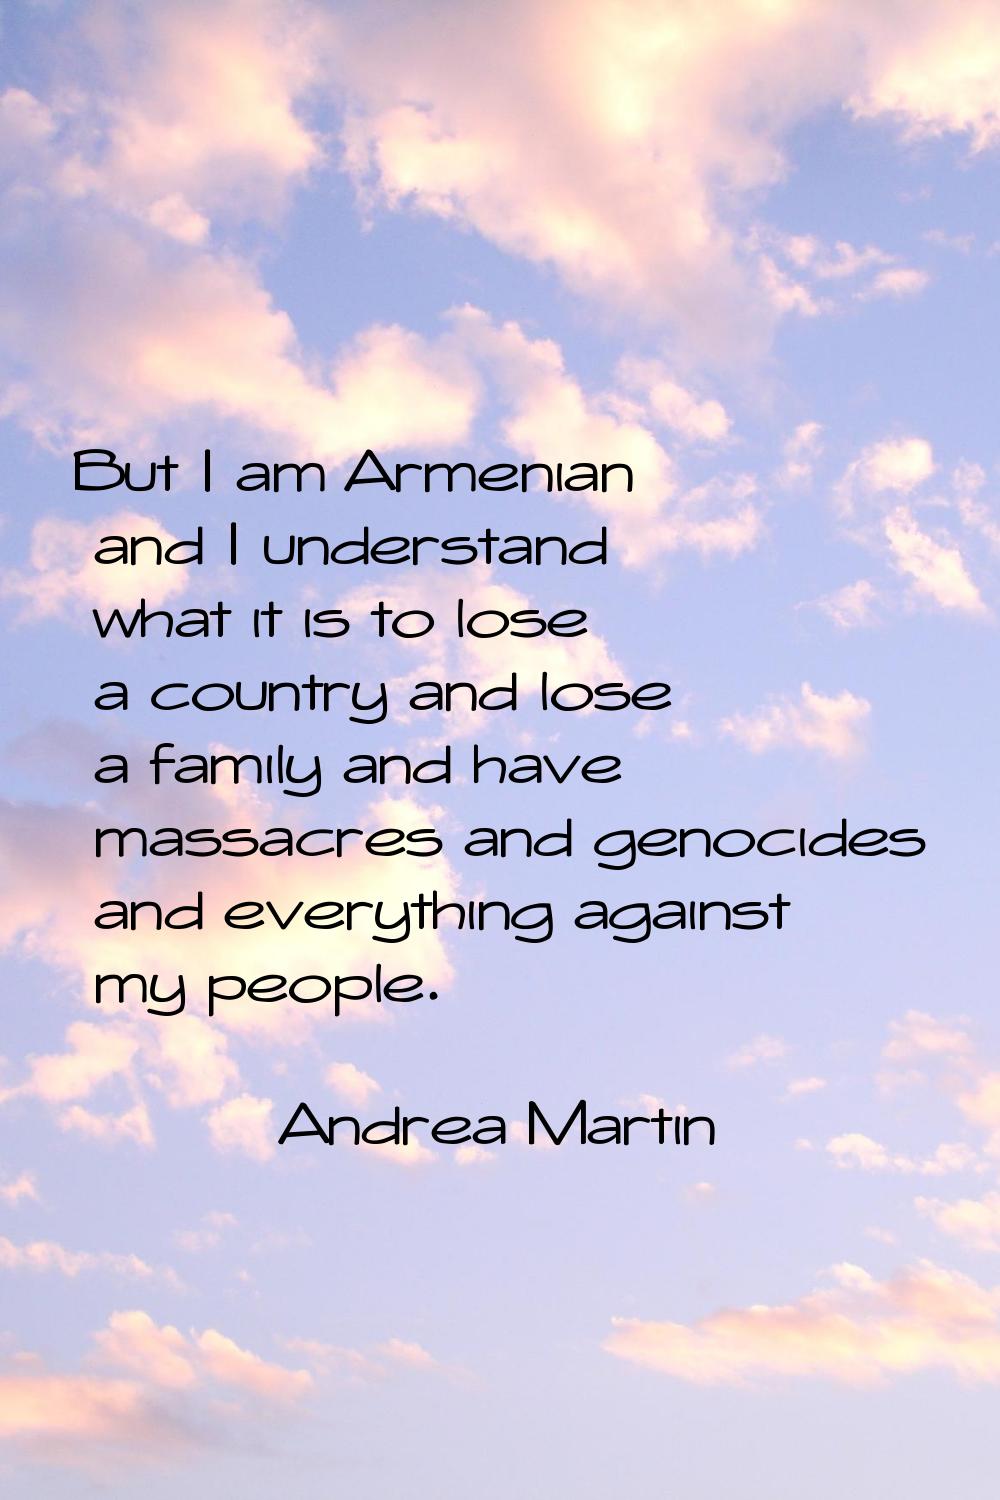 But I am Armenian and I understand what it is to lose a country and lose a family and have massacre